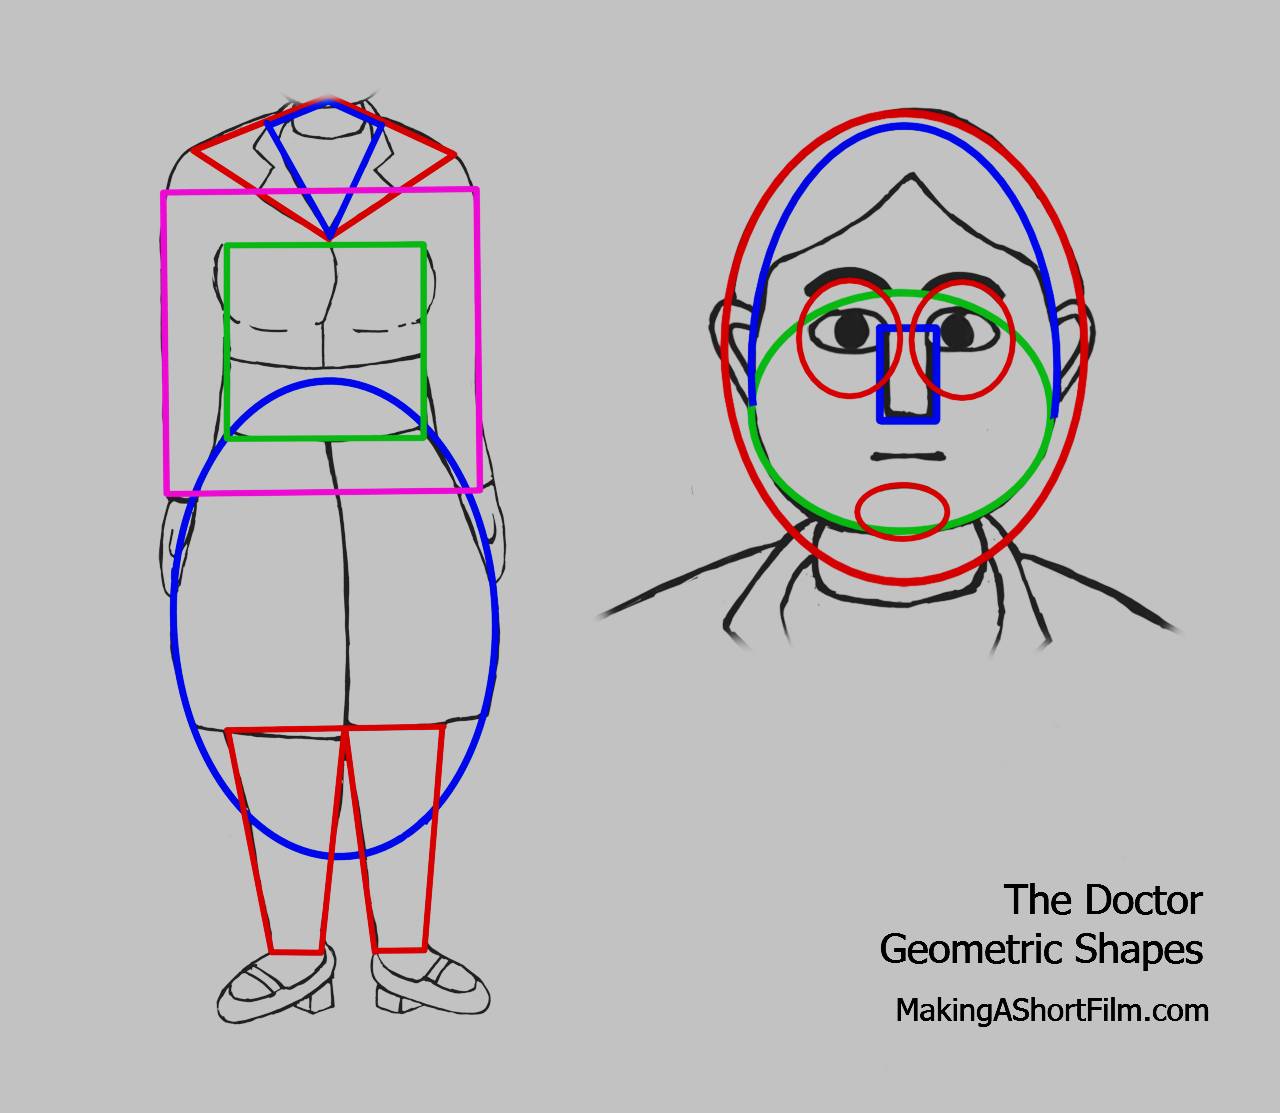 The geometric shapes of the Doctor